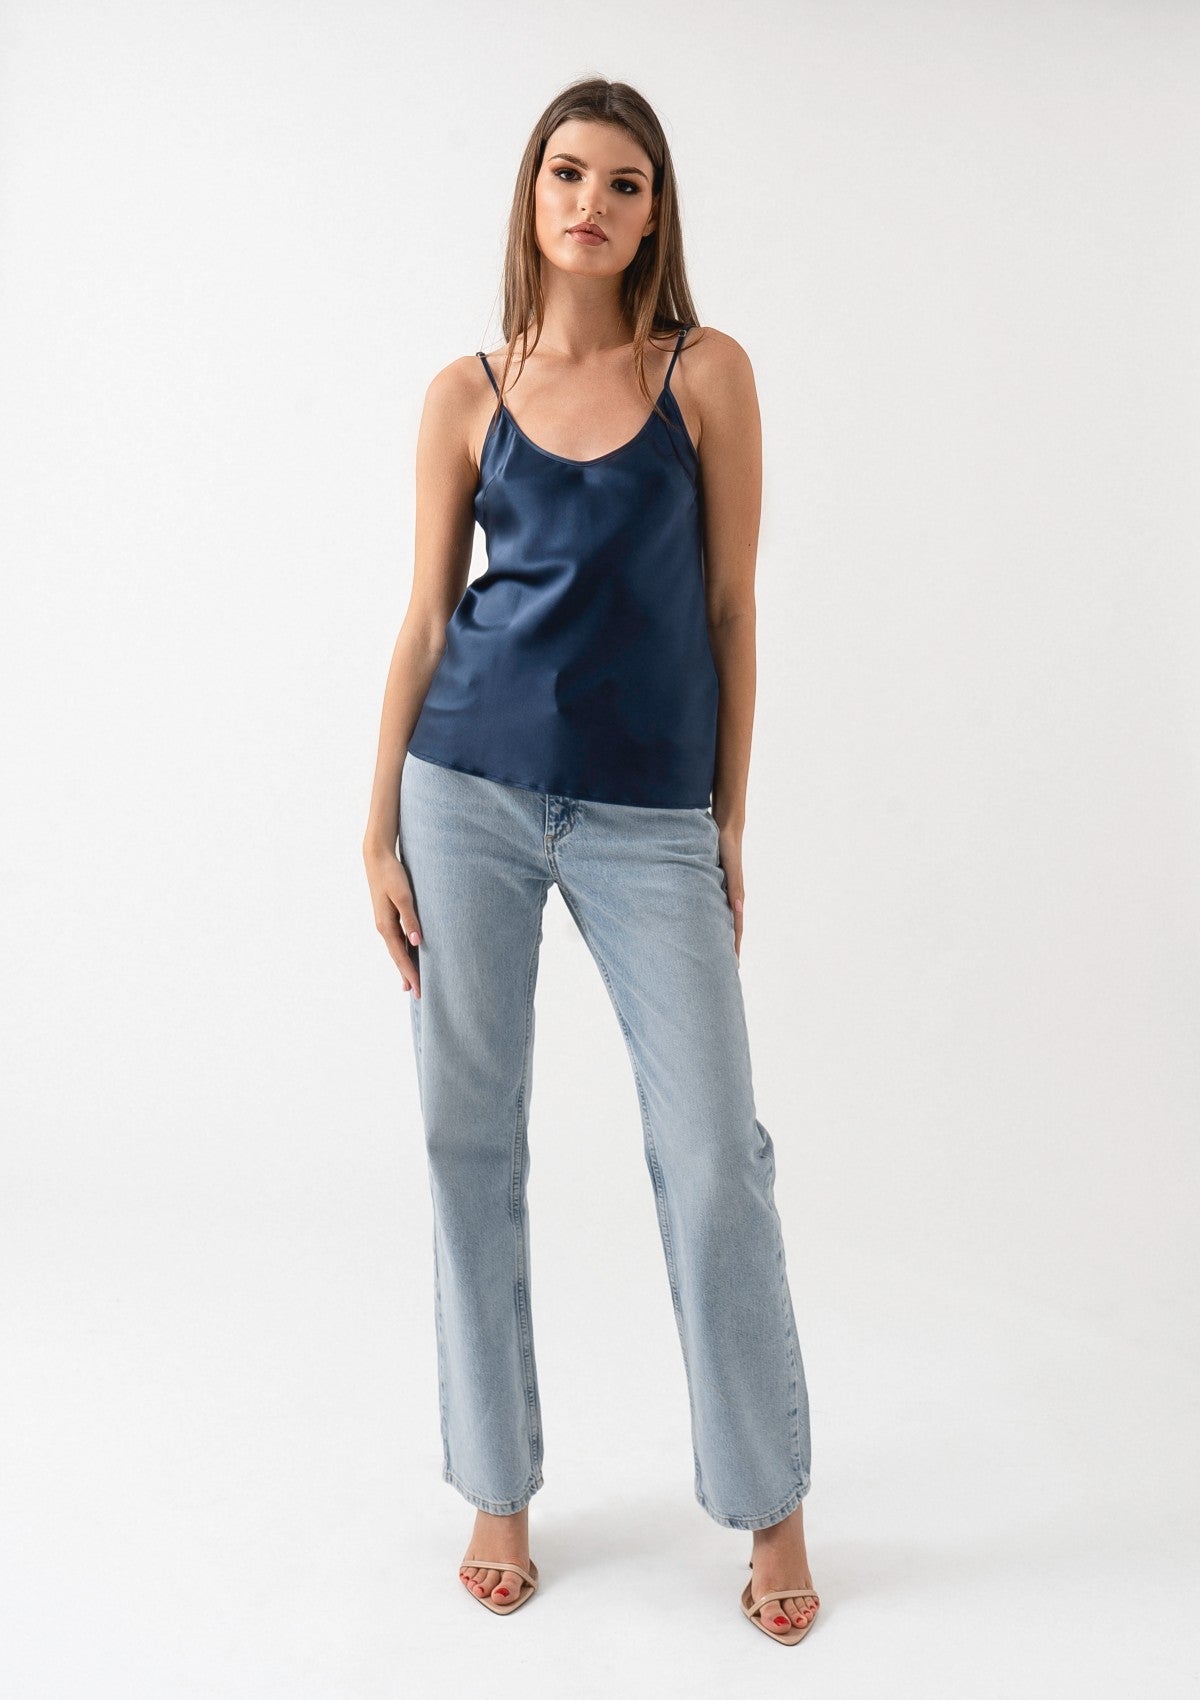 navy-blue-silk-camisole-top-Silk and tonic